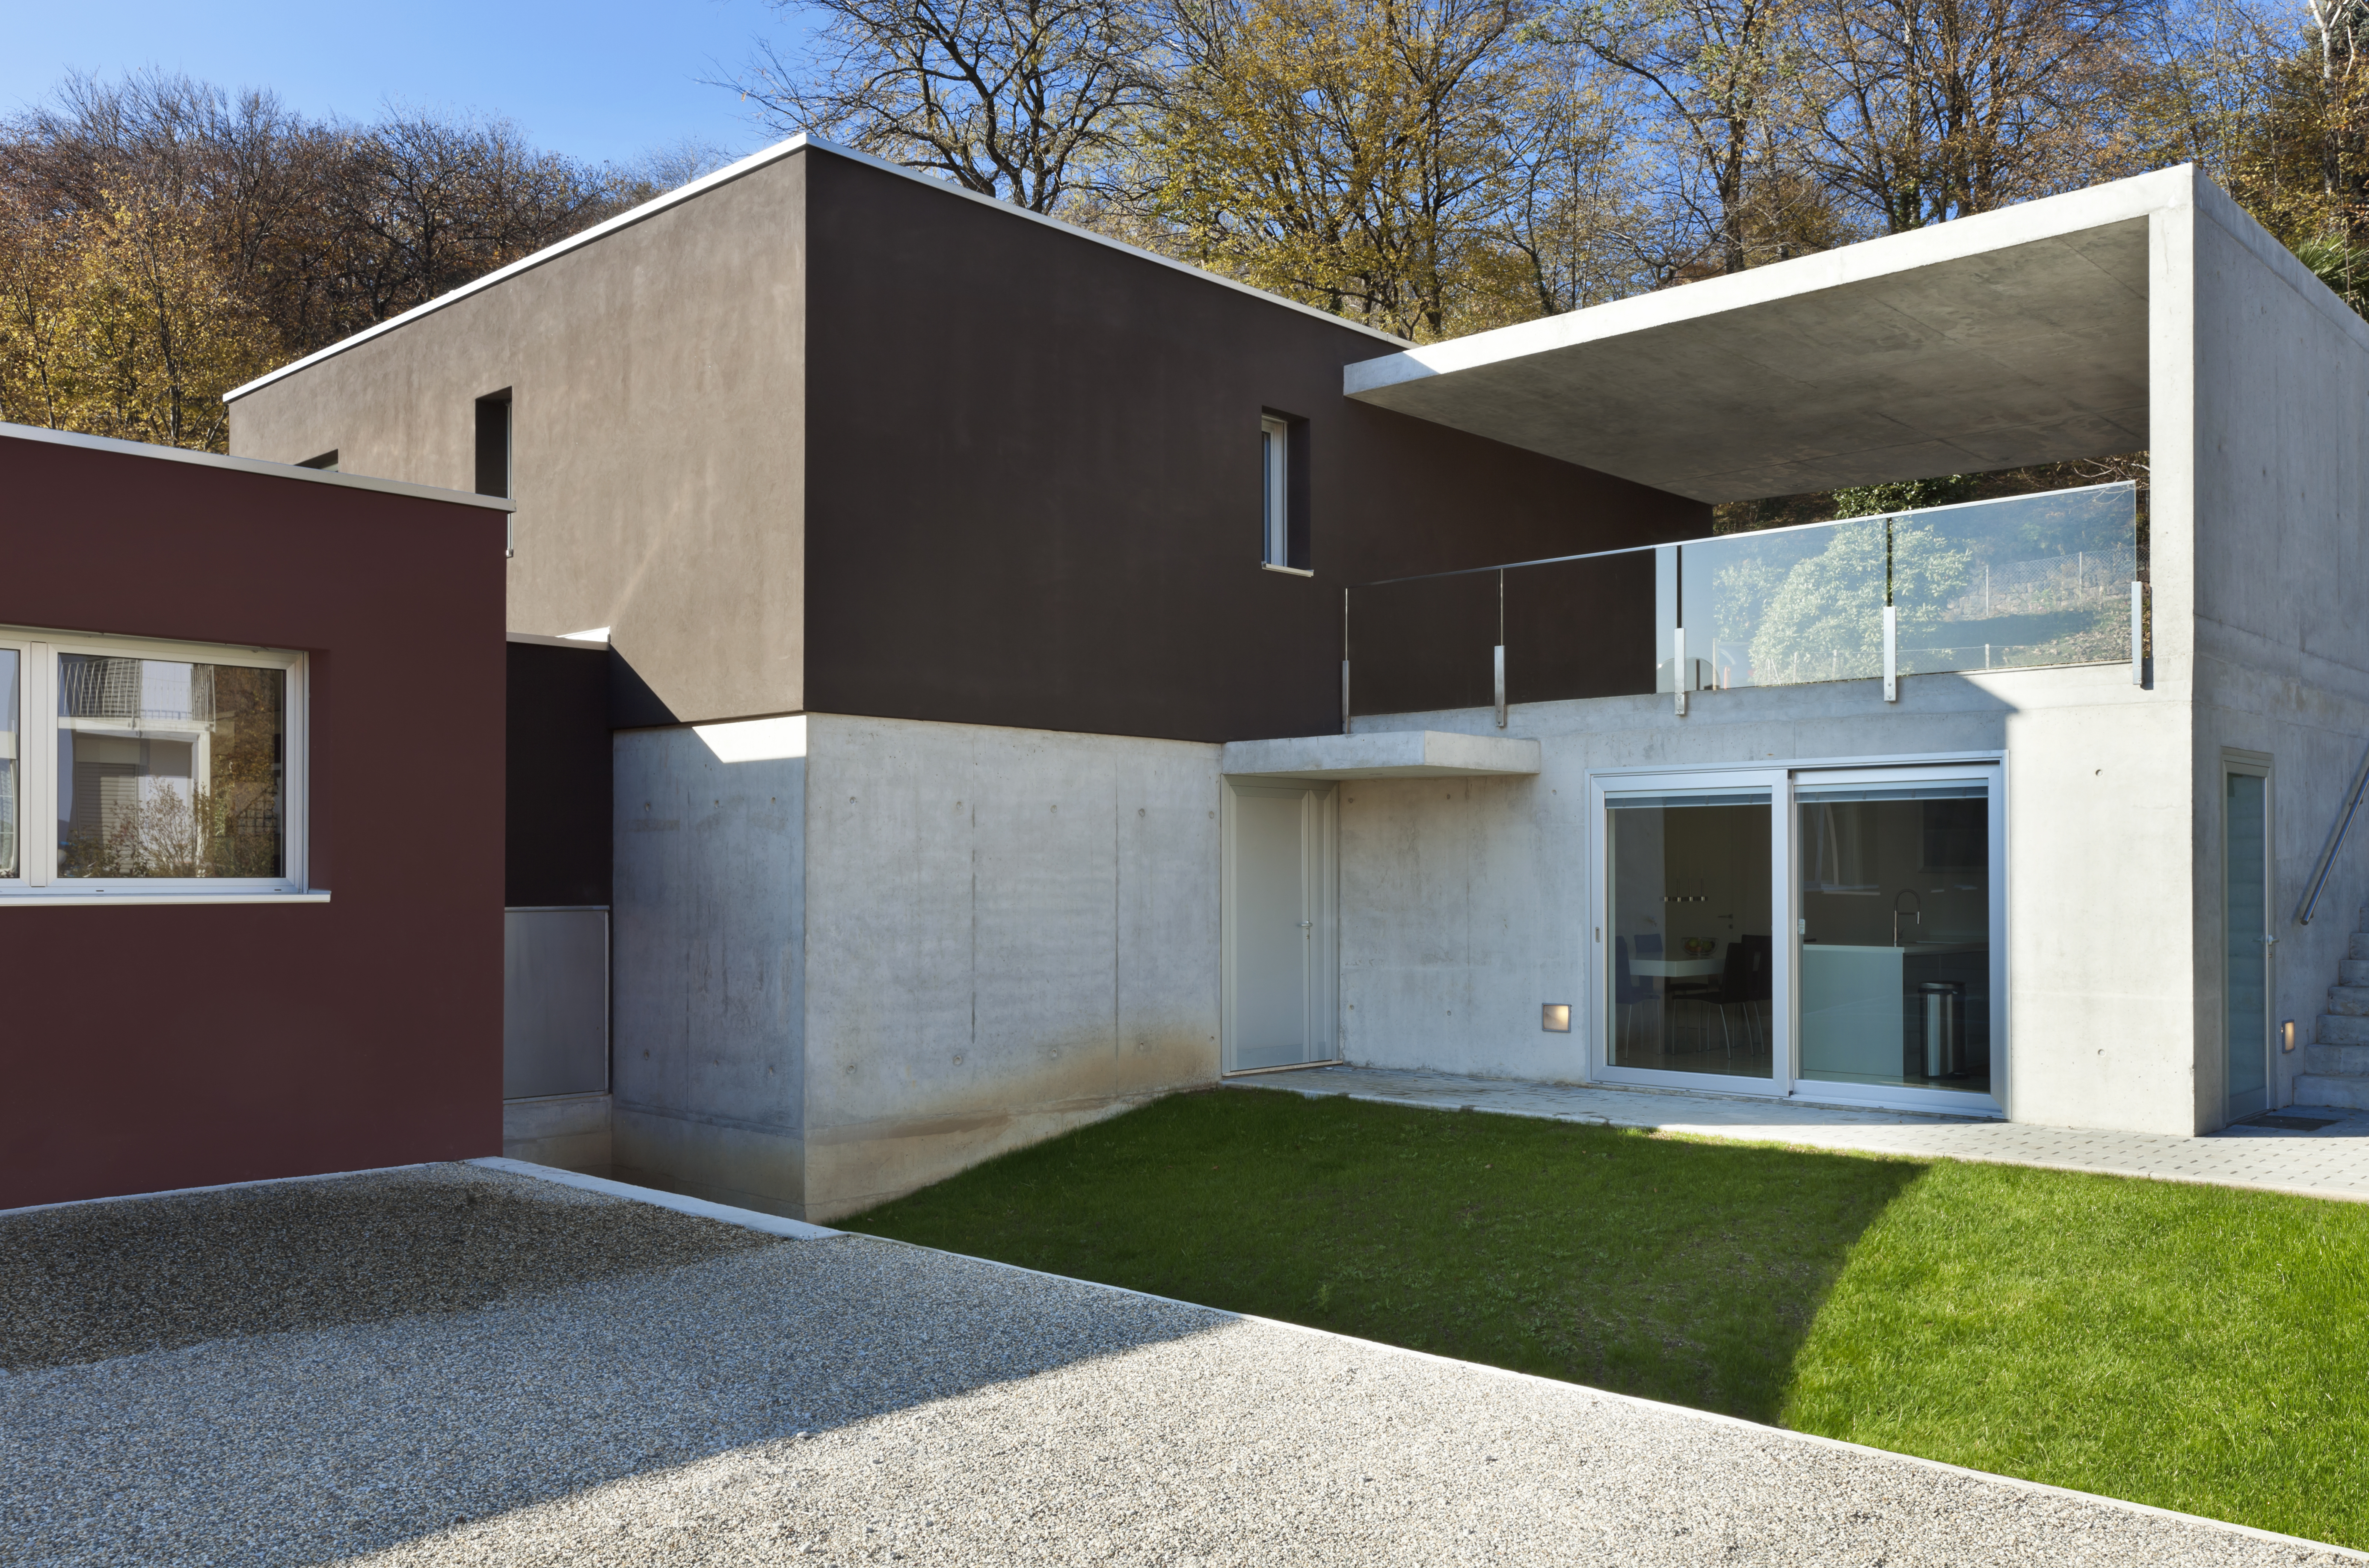 residential dwelling with deactivated concrete terrace